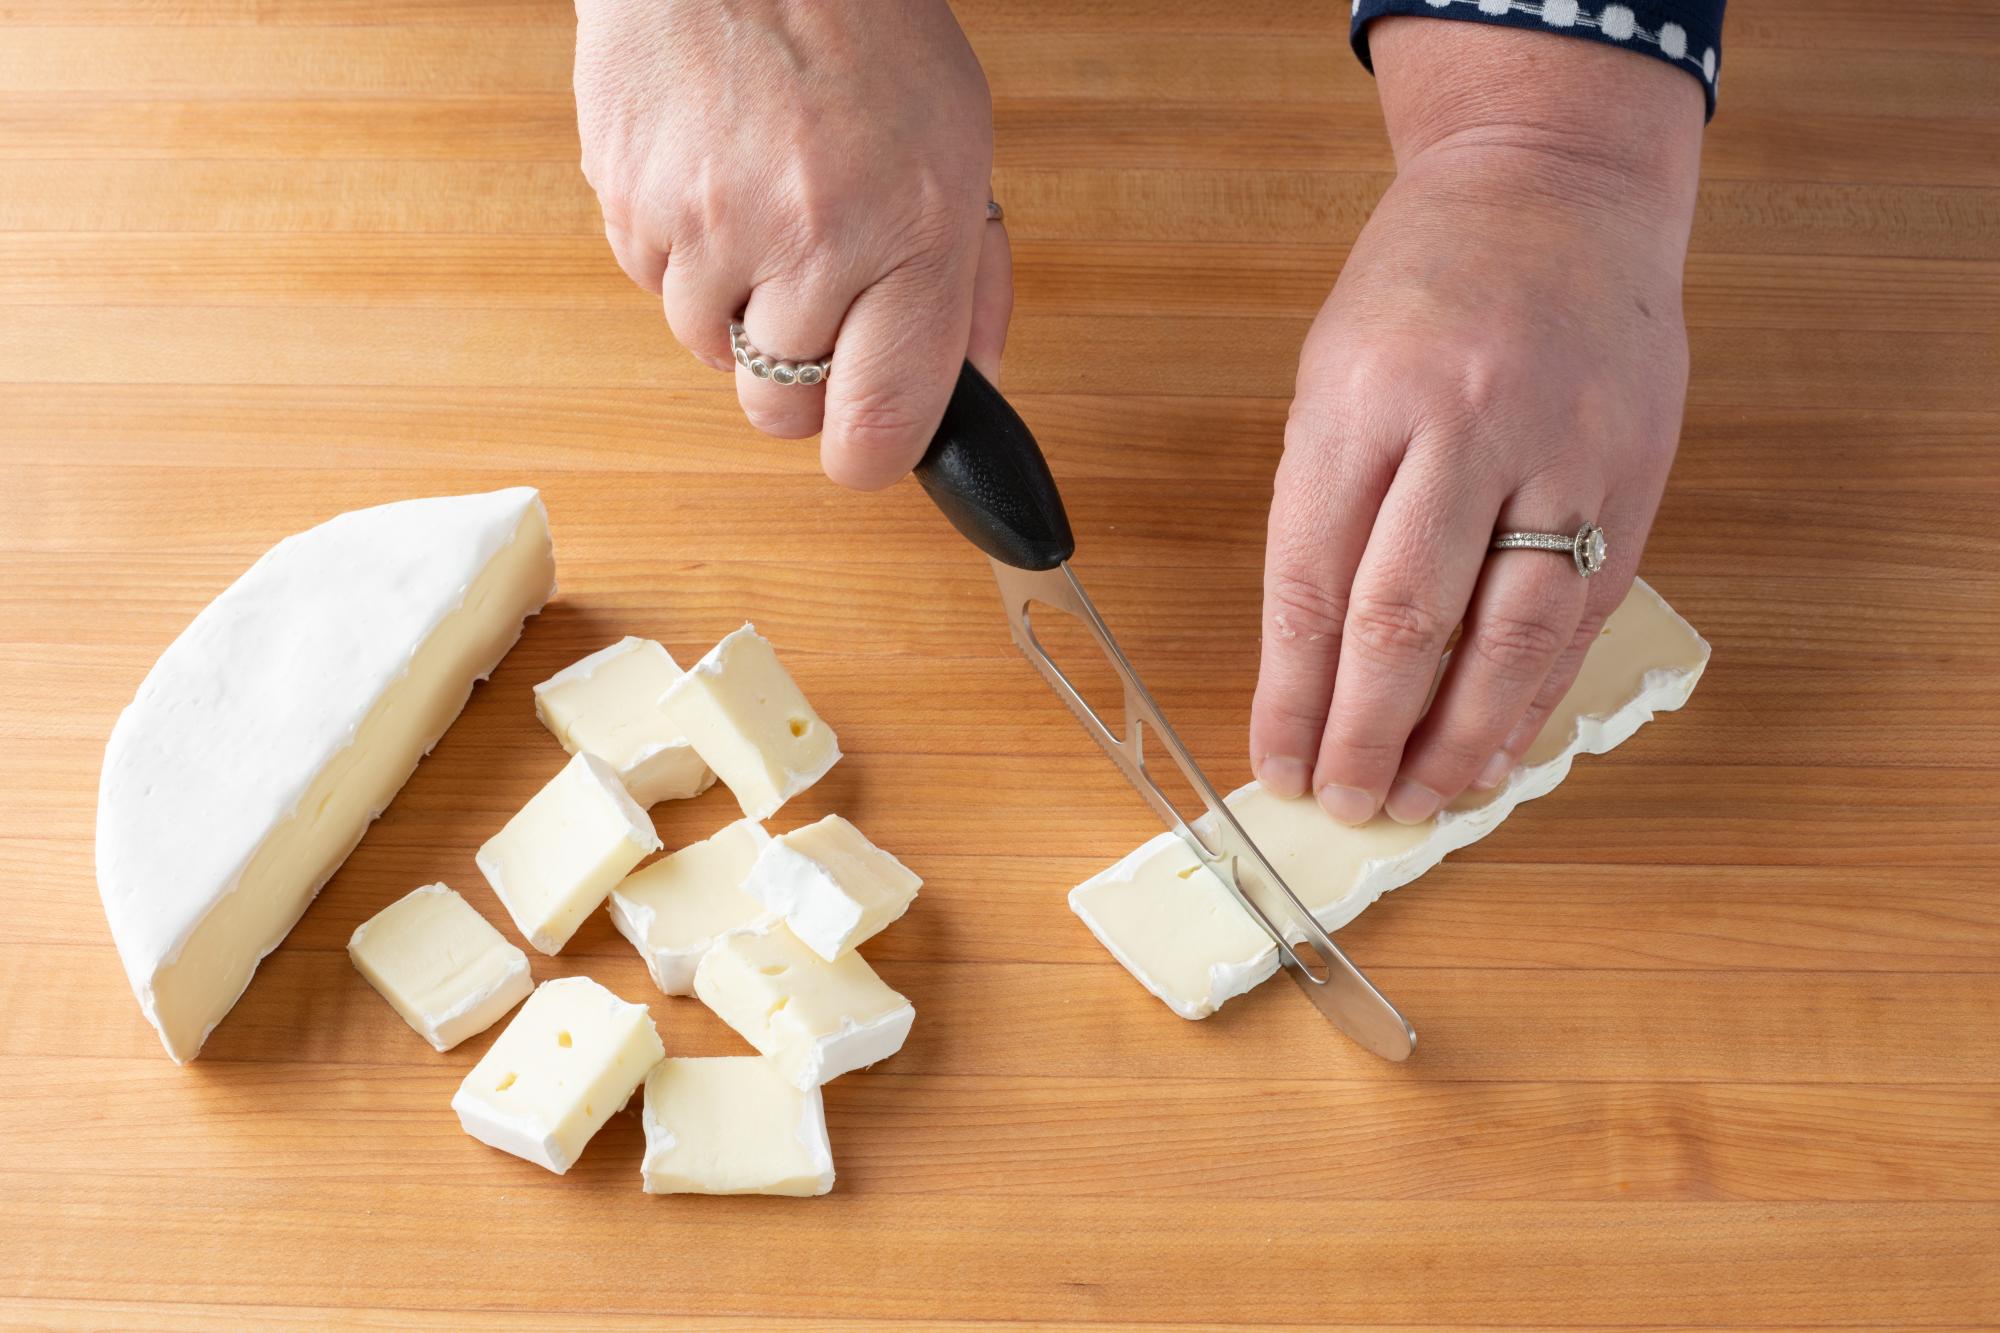 Cutting the Brie into small pieces using a Cheese Knife.